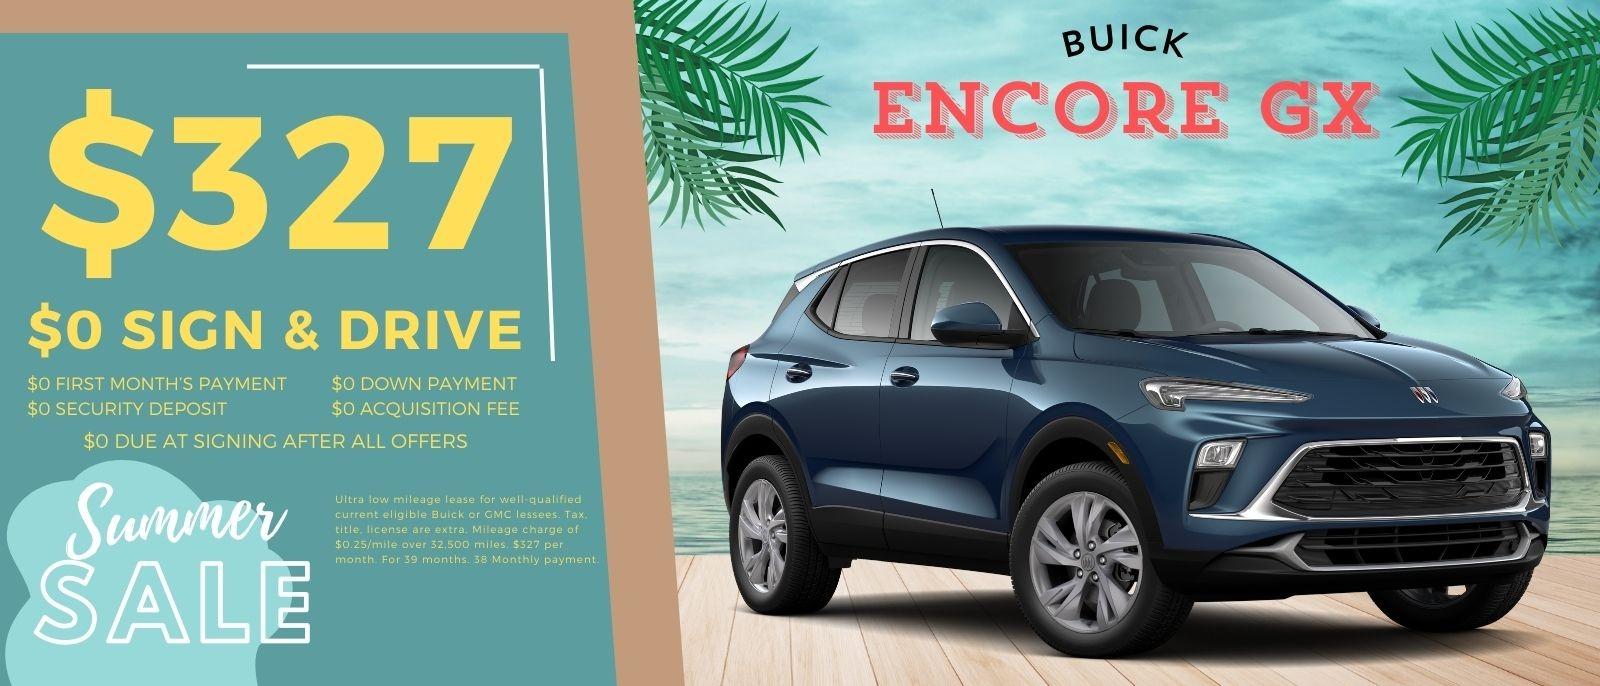 Buick Encore GX Sign and Drive Lease